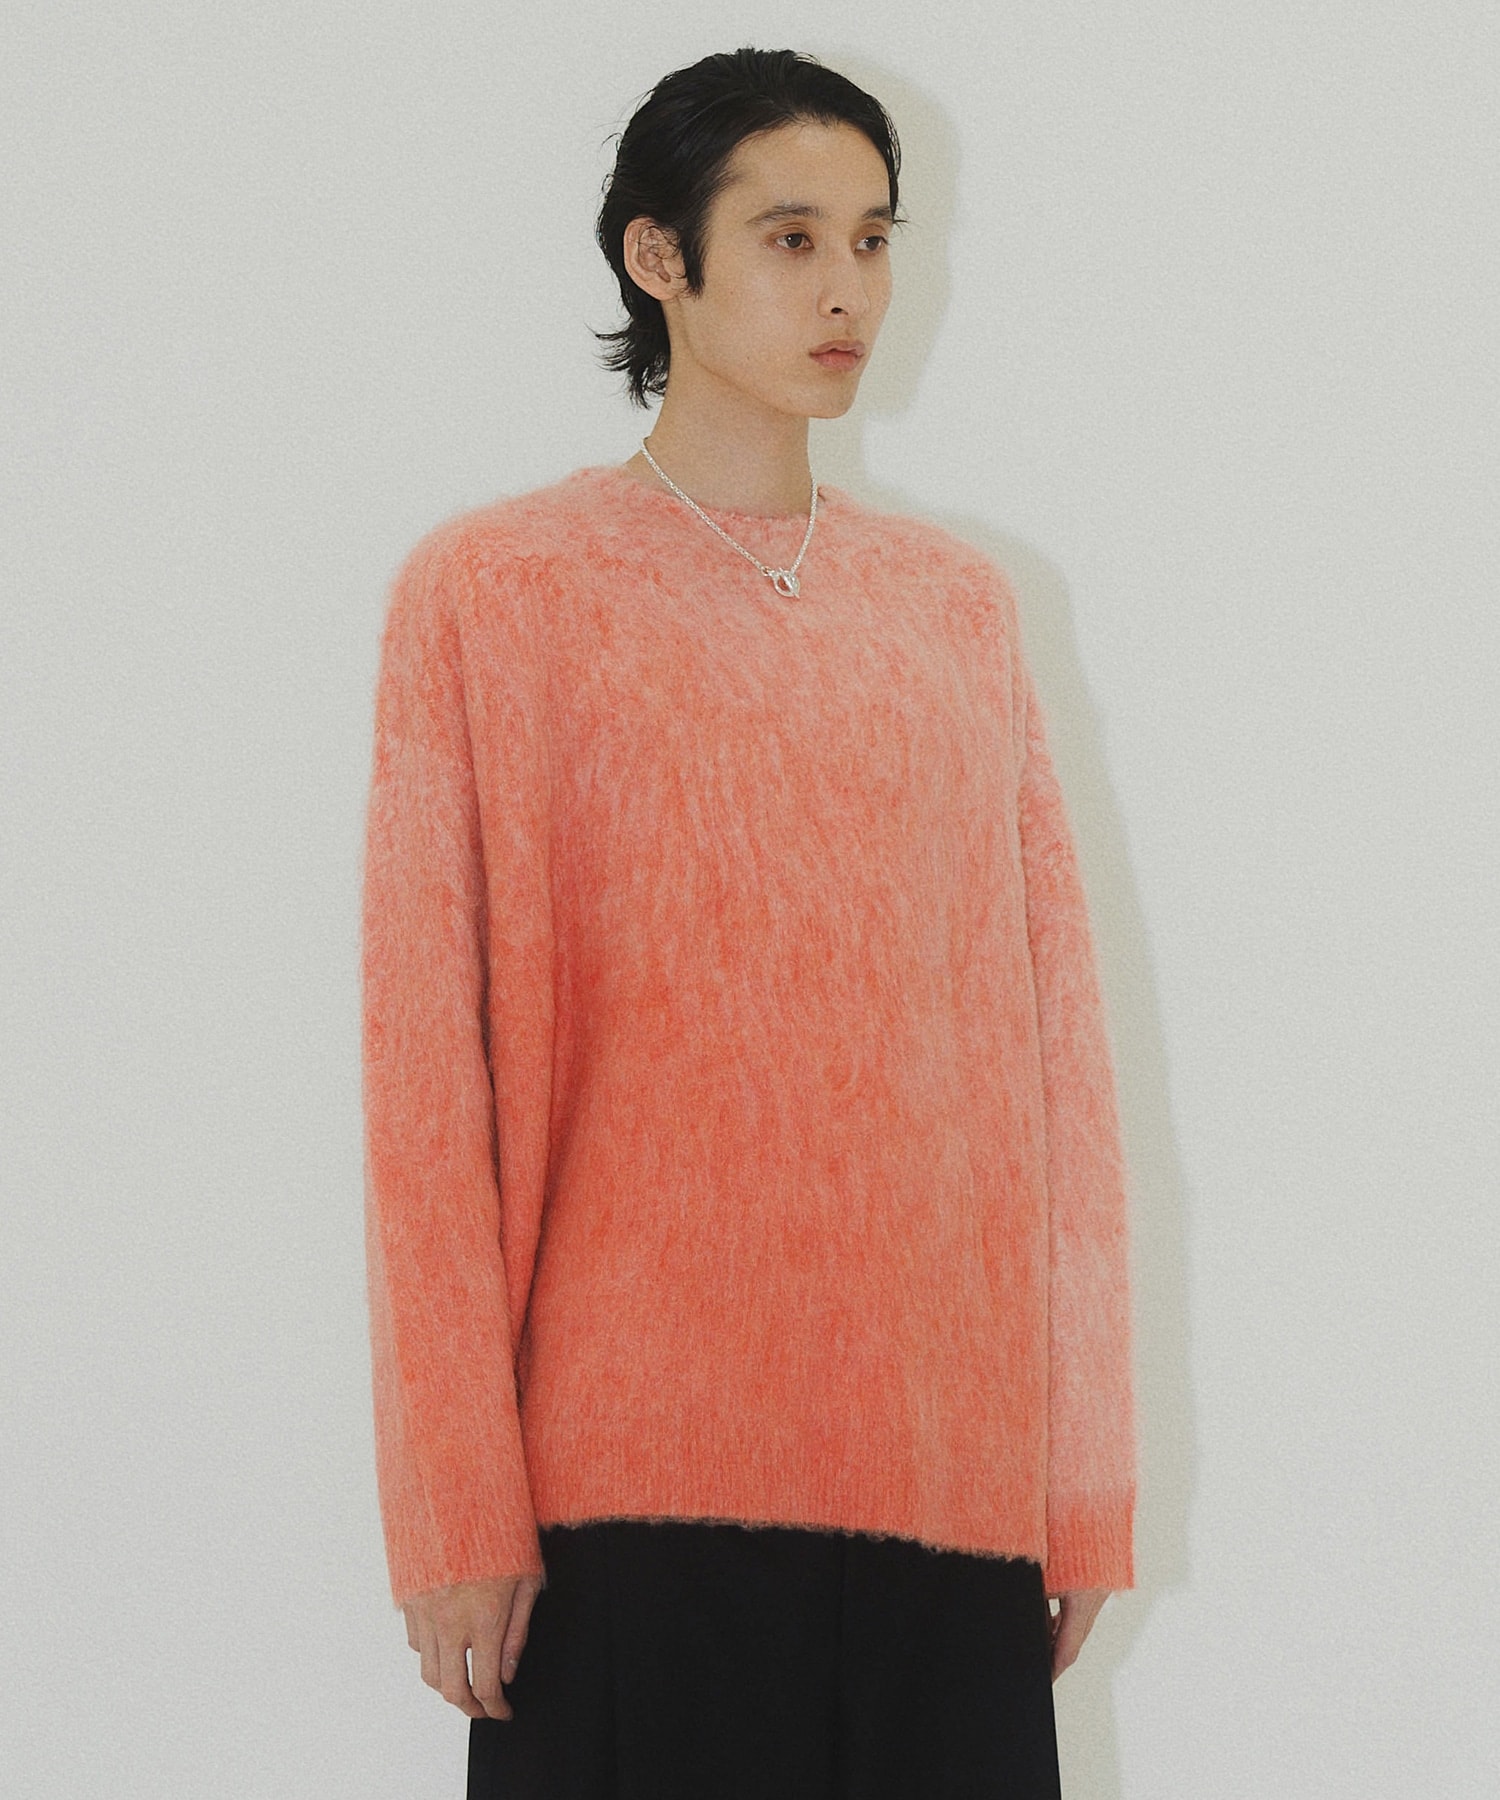 KNUTH MARF  Uneck knit pullover(unisex)トップス